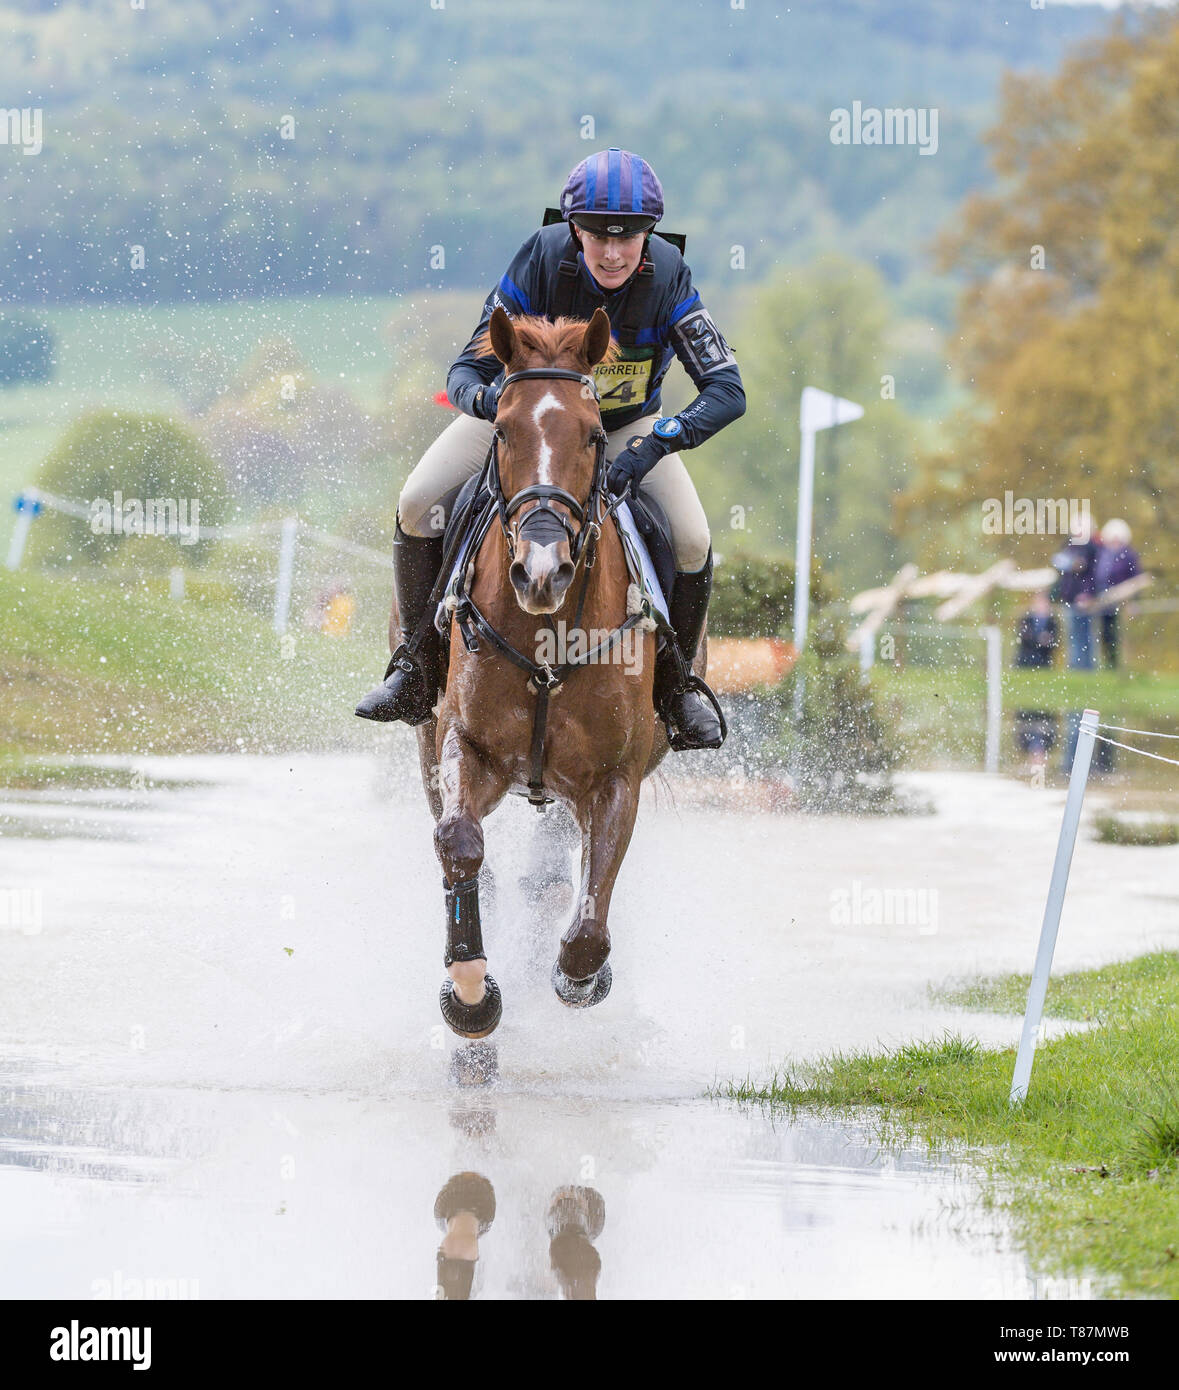 Dodson and Horrell Chatsworth House International Horse Trials, Derbyshire, England, 11th May 2019. Zara Tindall and her horse Match My Class Stock Photo